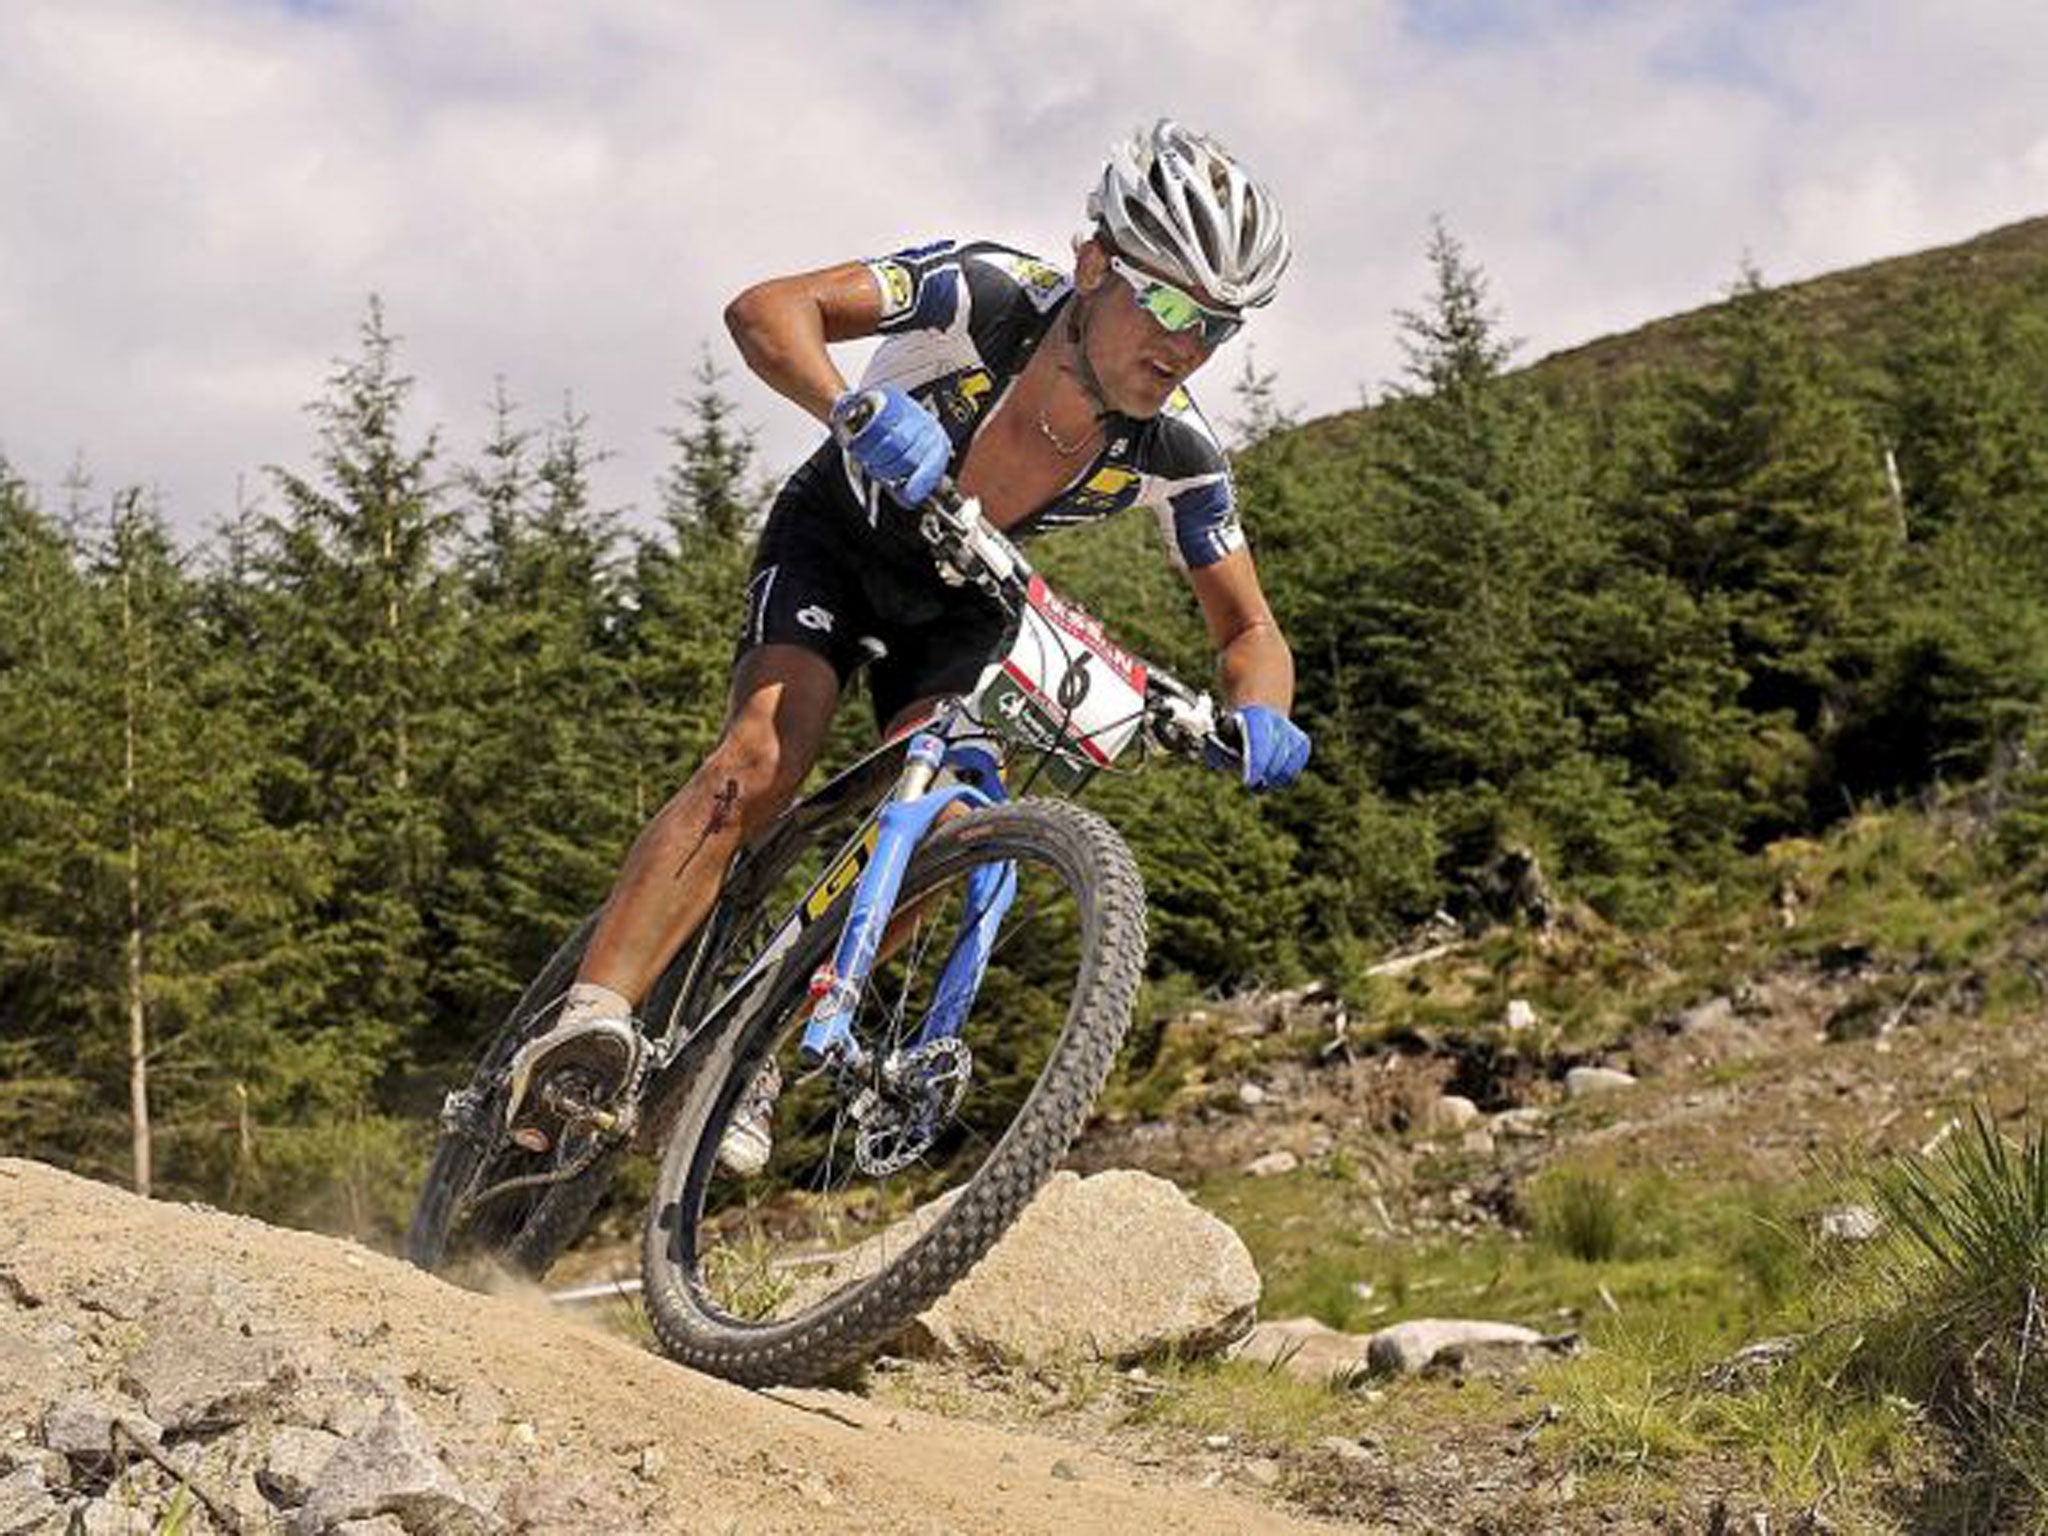 South Africa’s Burry Stander in the Mountain 2008 Bike World Cup